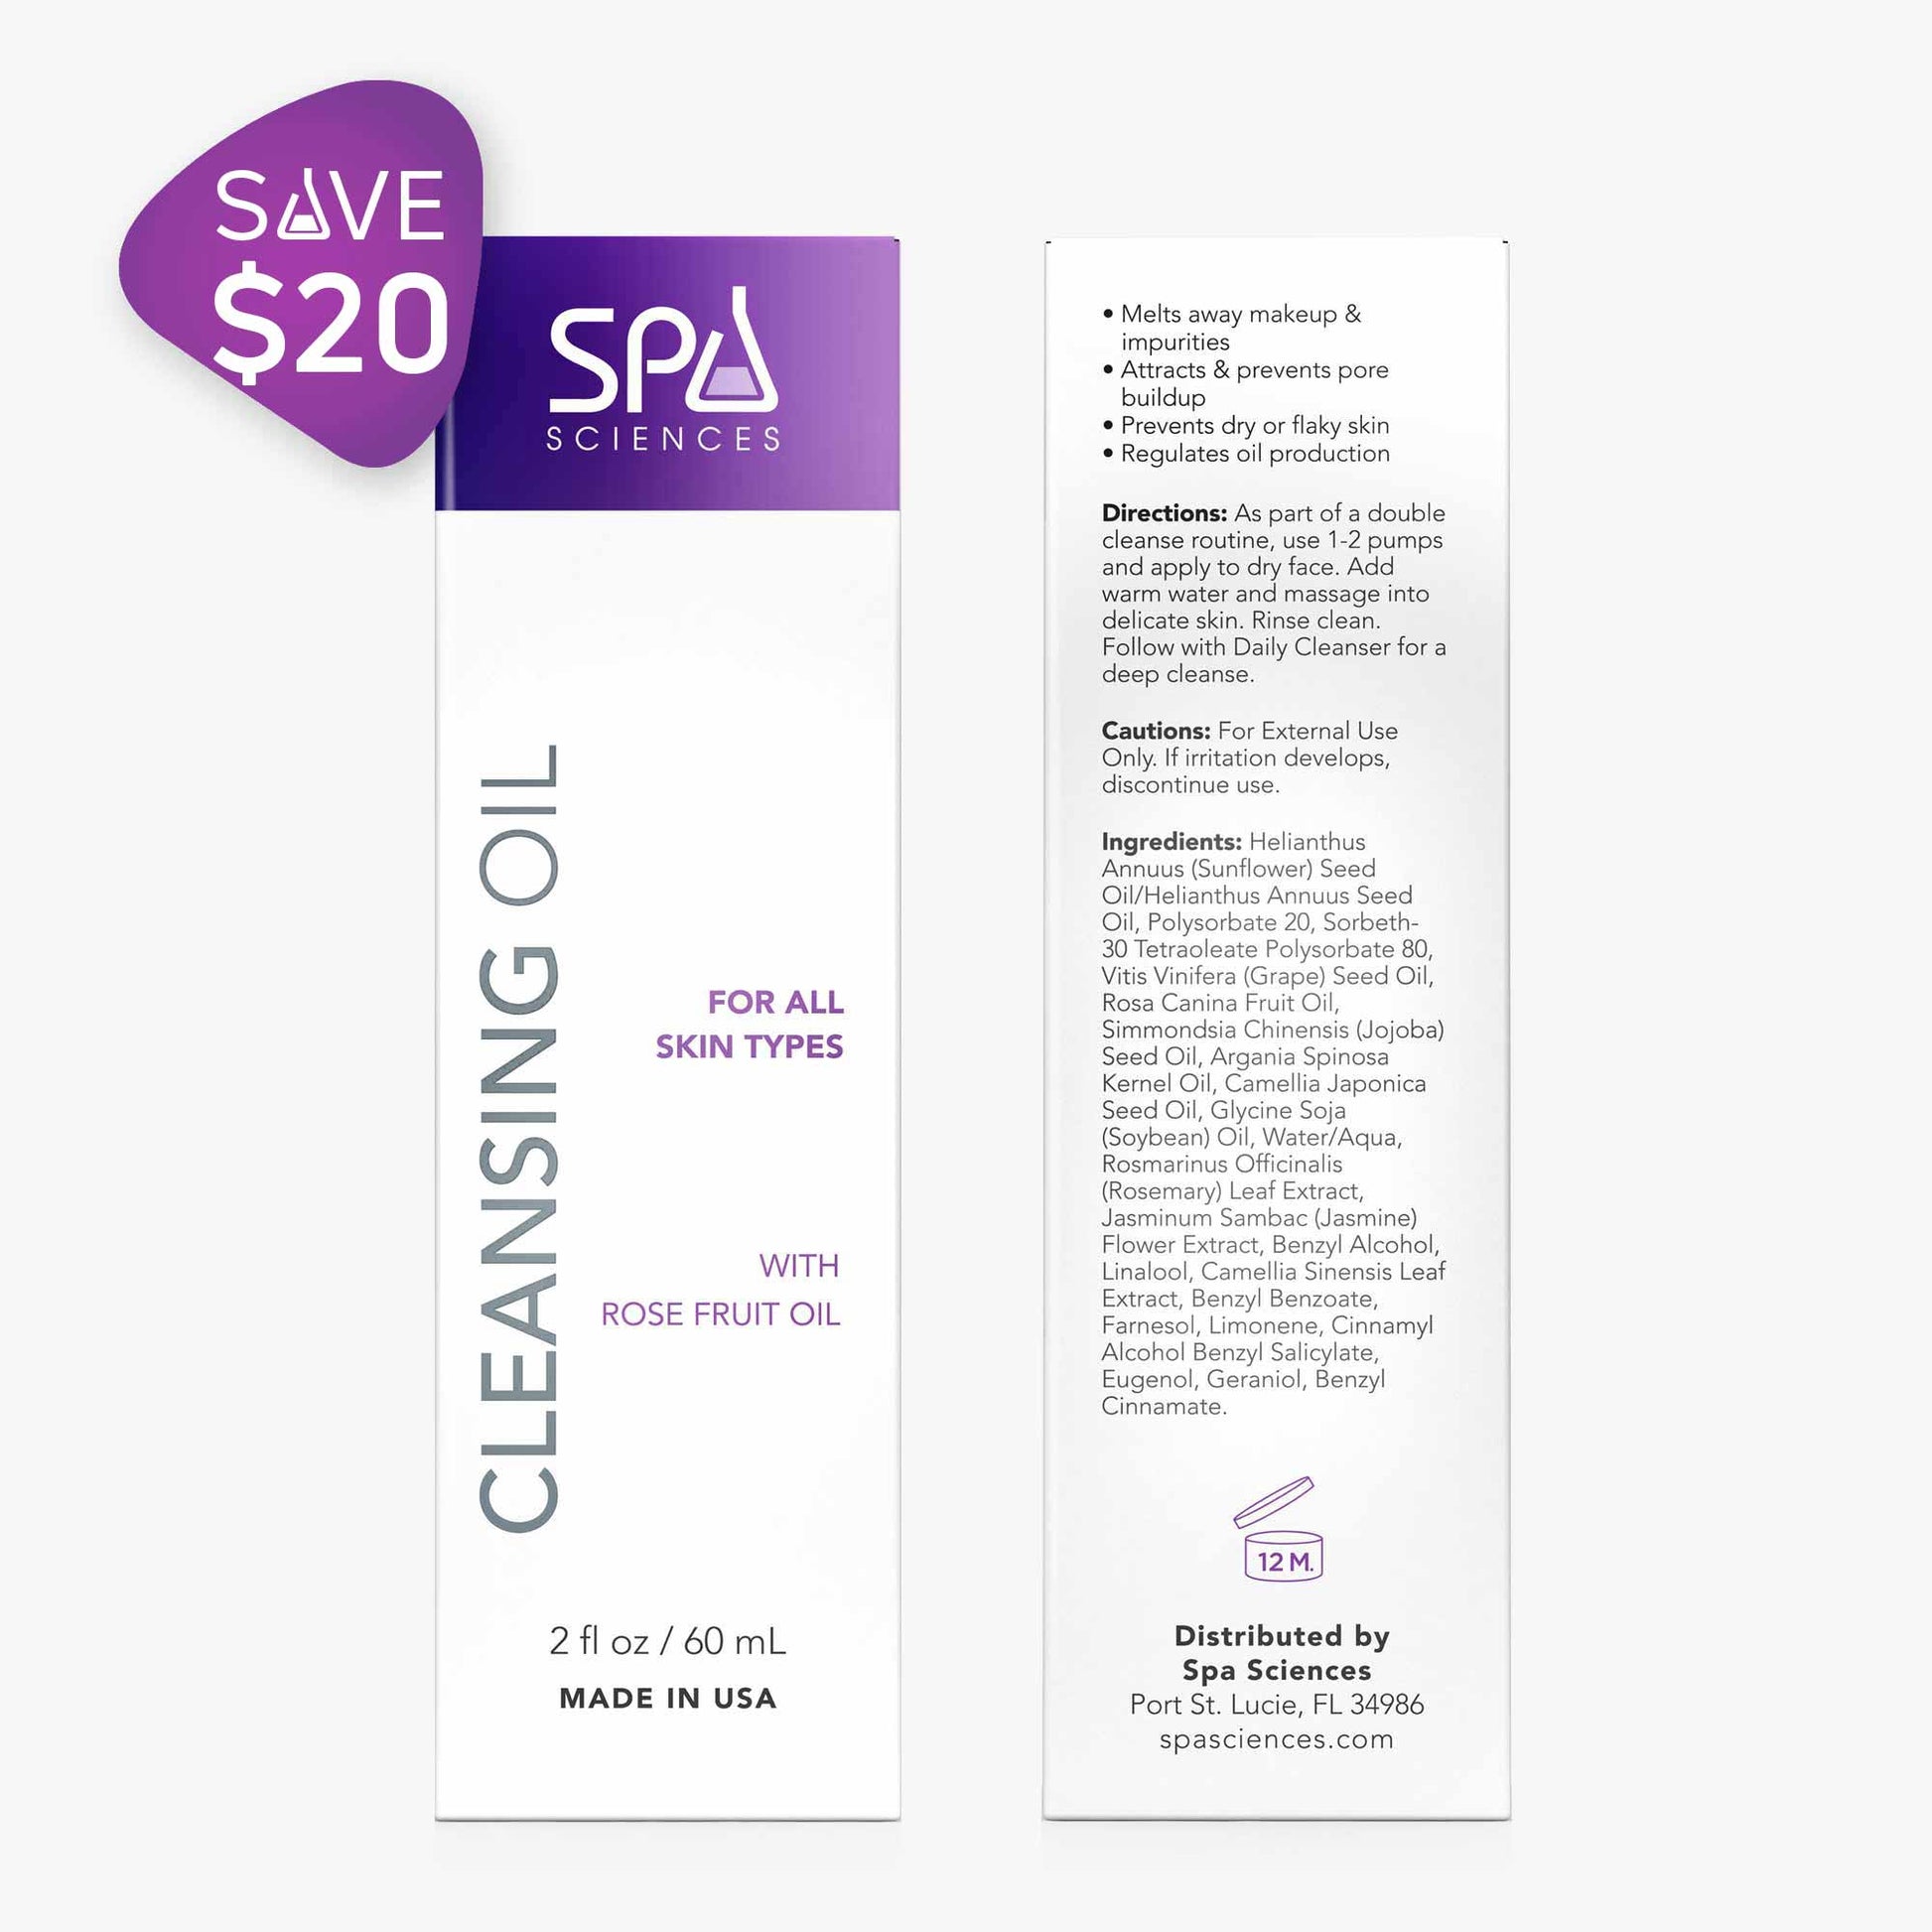 A bottle of Spa Sciences cleansing oil with a purple label.